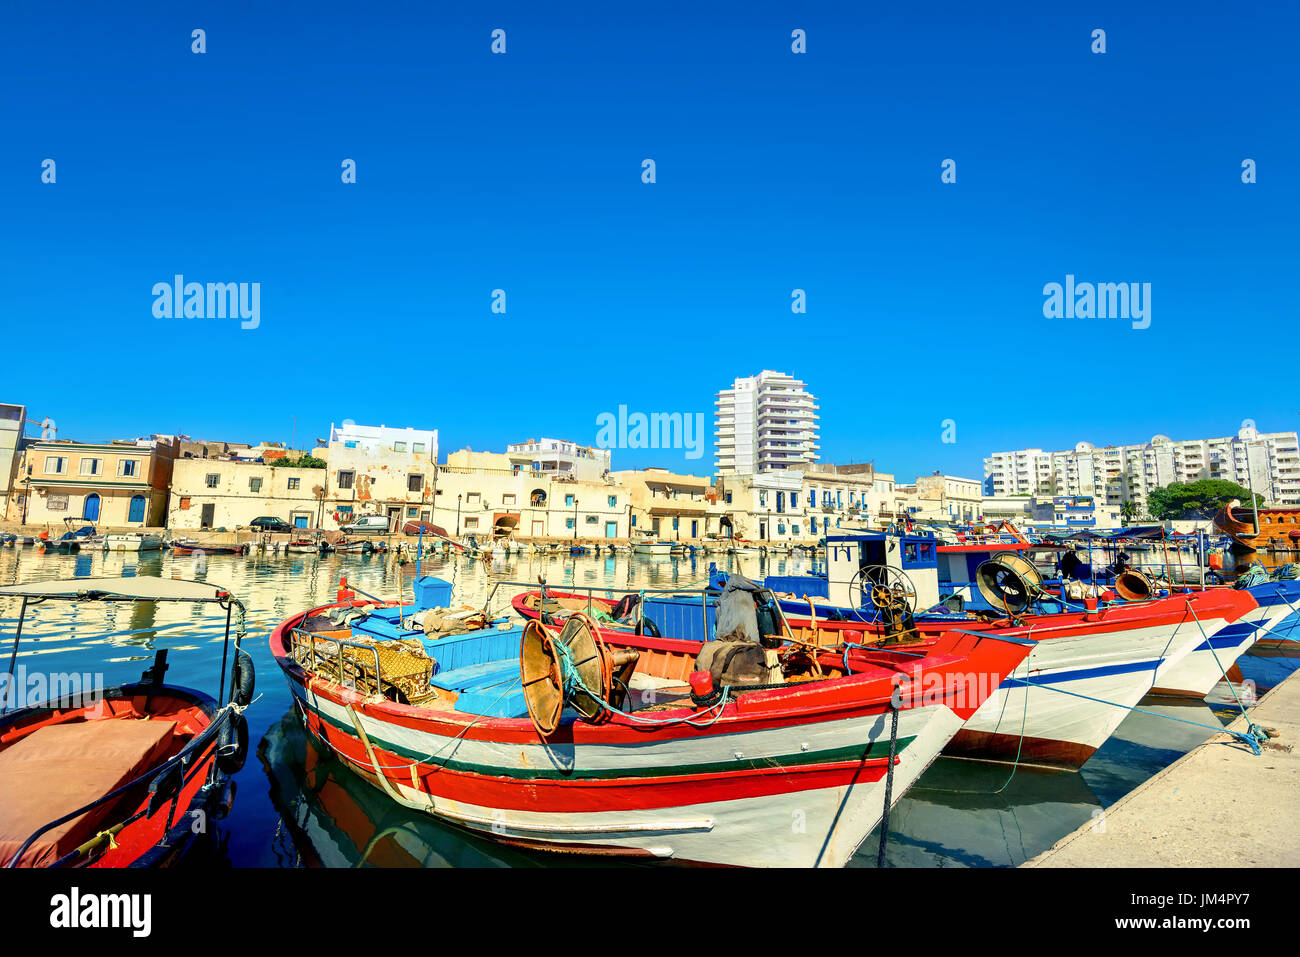 Scenic view of colorful fishing boats in Bizerte. Tunisia, North Africa Stock Photo